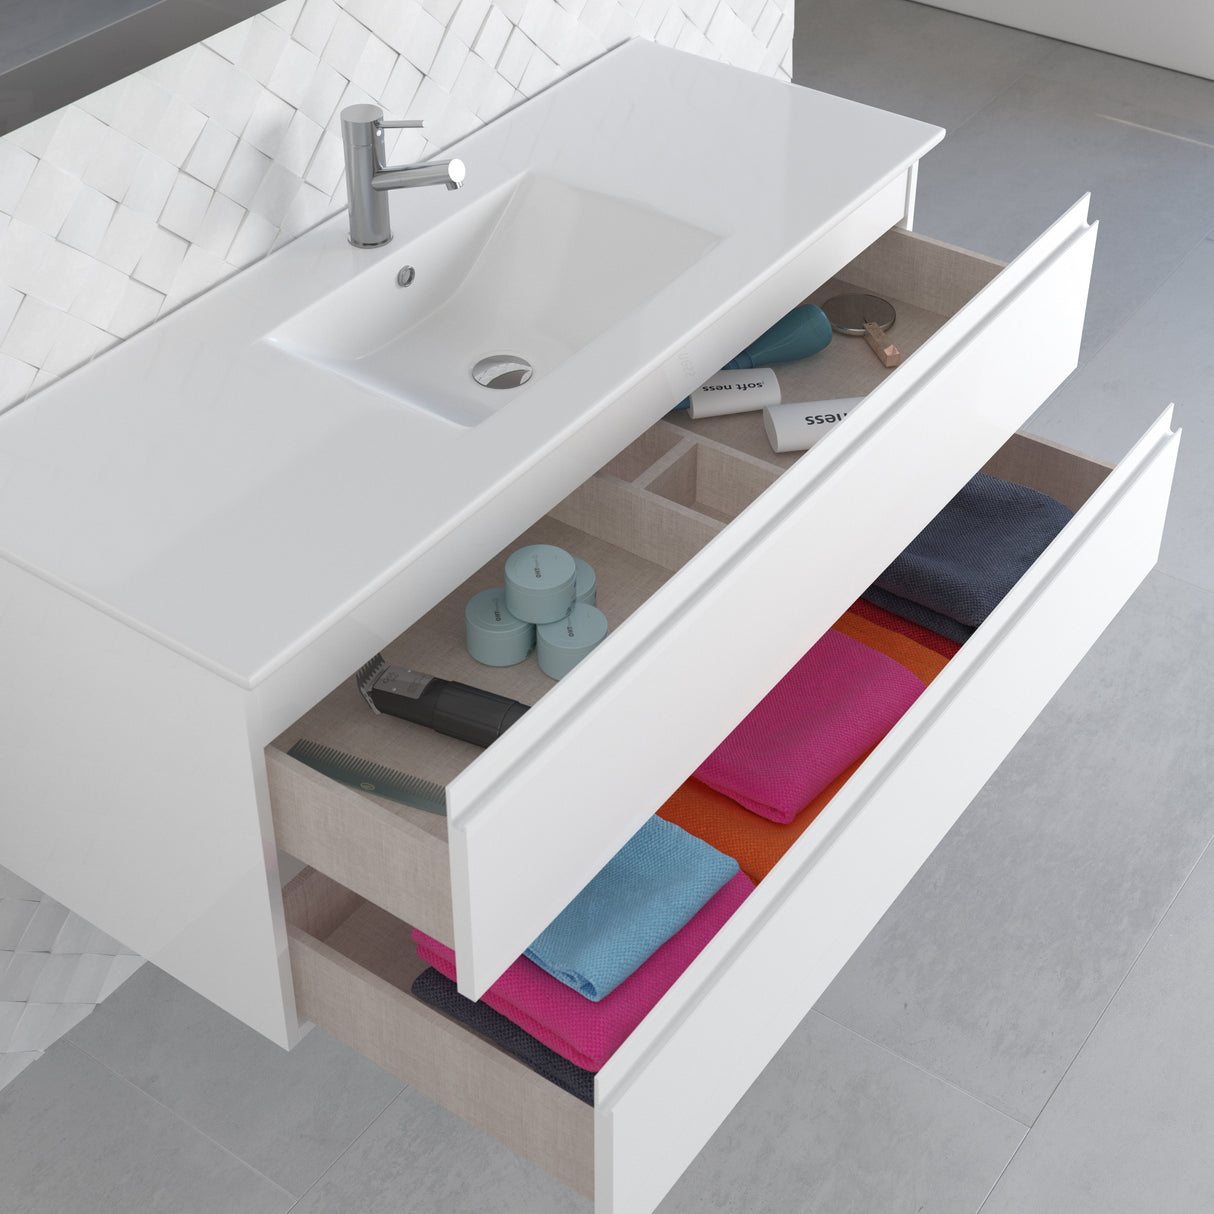 DAX Pasadena Engineered Wood and Porcelain Onix Basin with Vanity Cabinet, 48", Glossy White DAX-PAS014811-ONX